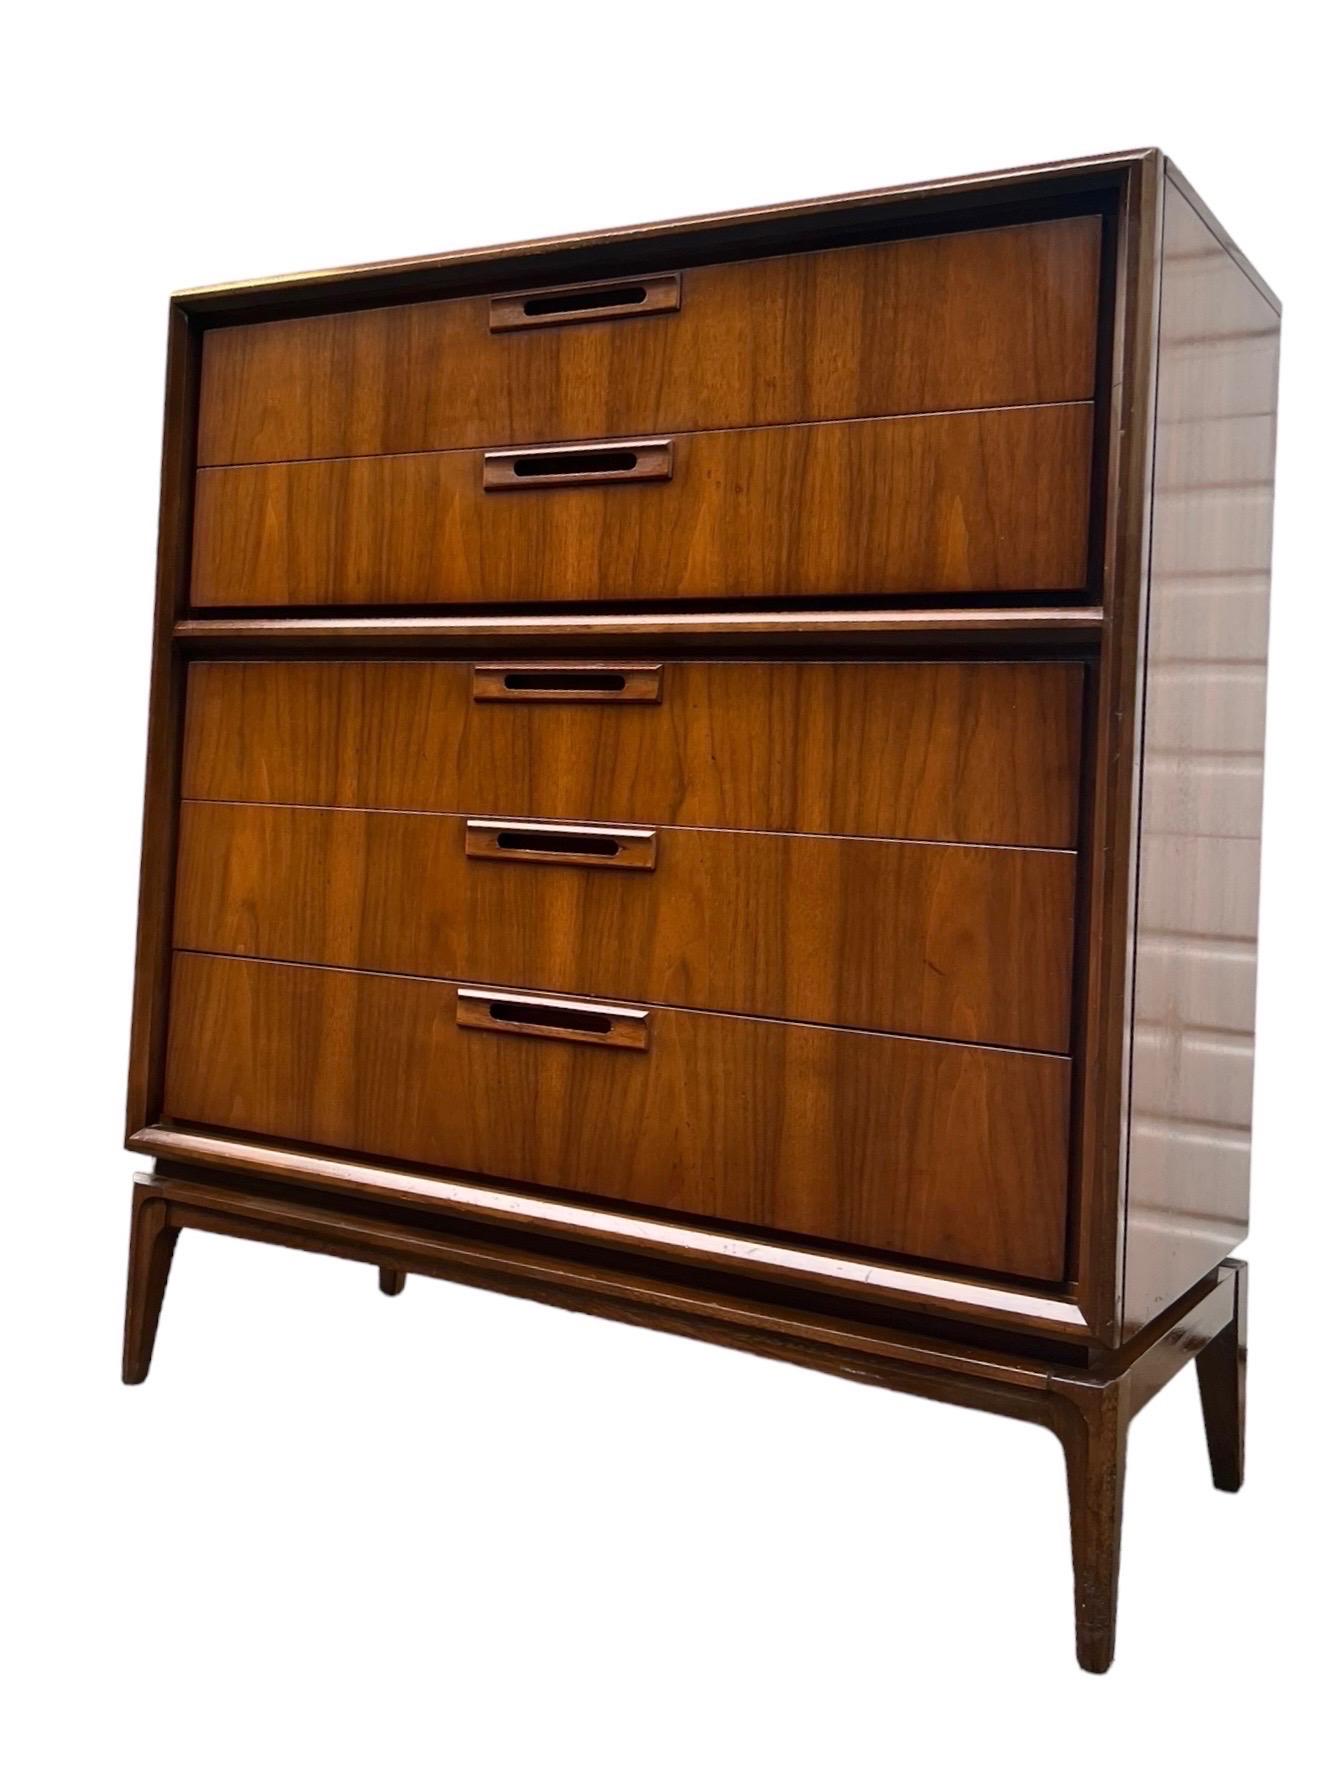 Vintage Mid Century Modern Solid Walnut Dresser Dovetail Drawers by Stanley  In Good Condition For Sale In Seattle, WA